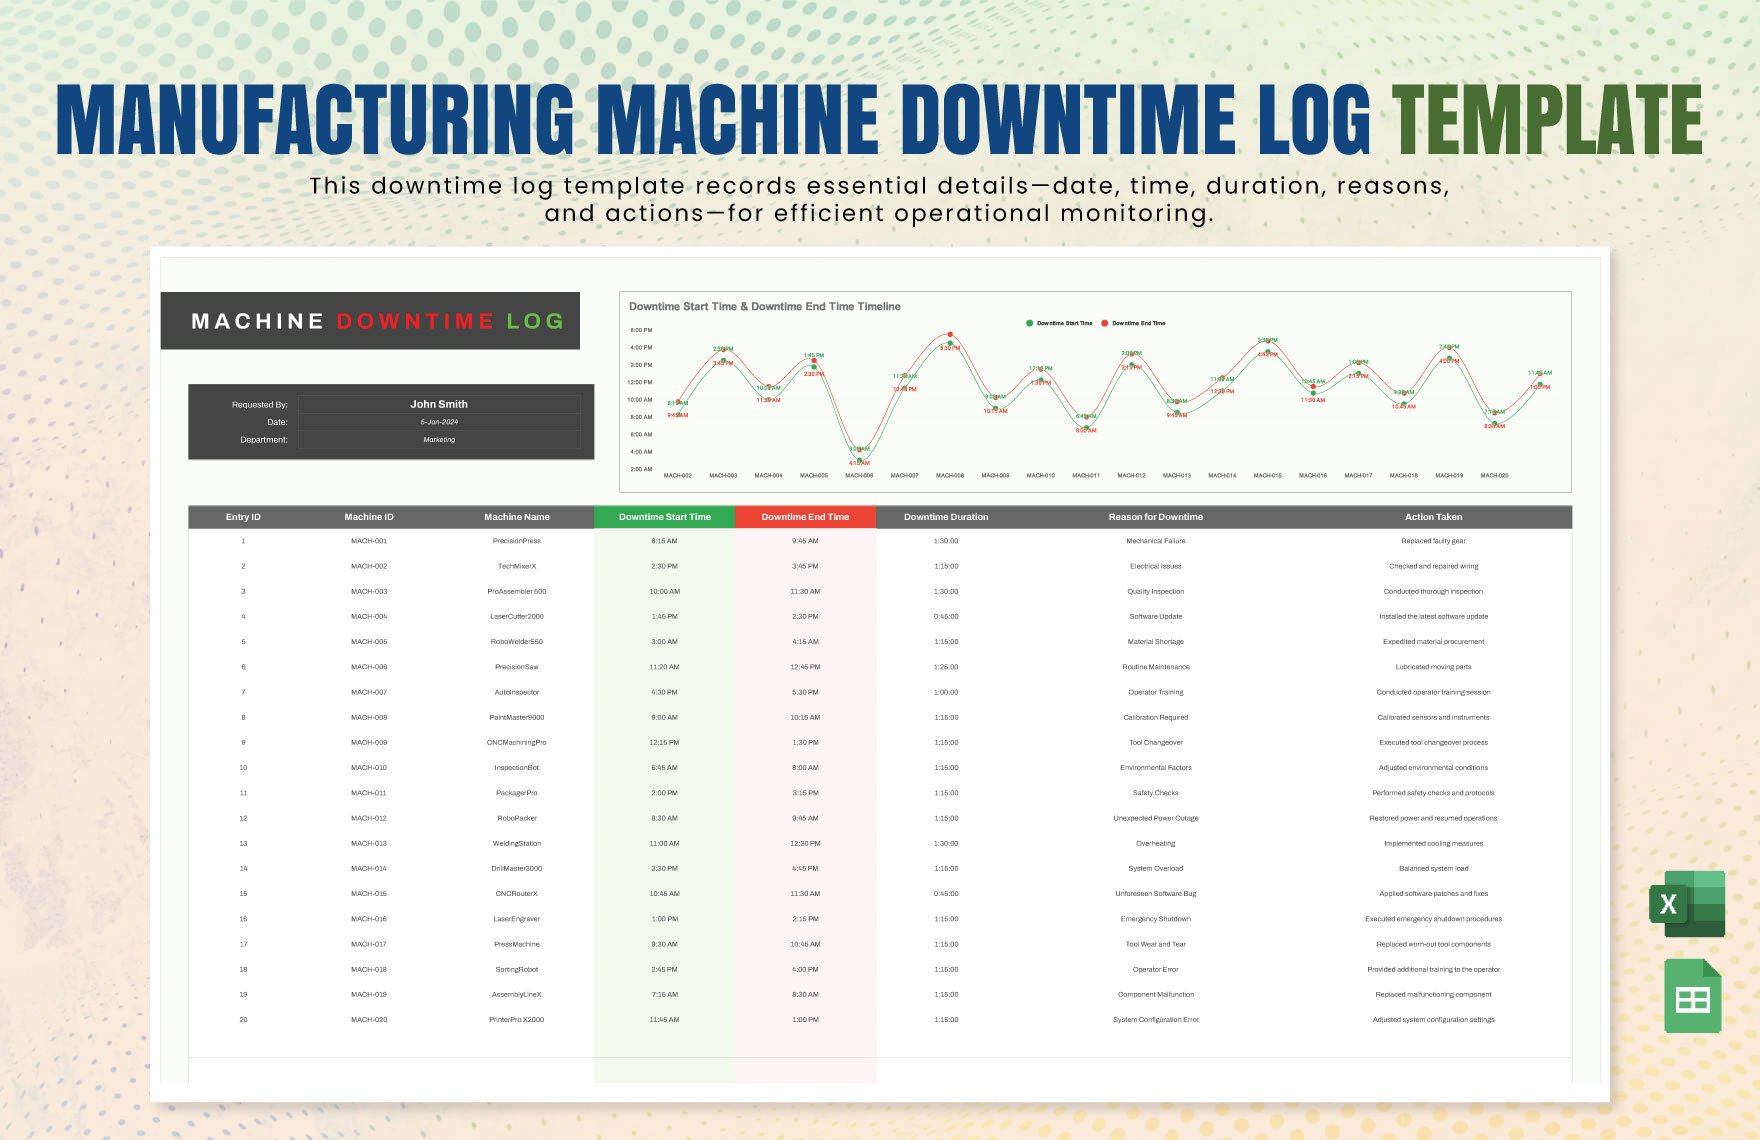 Manufacturing Machine Downtime Log Template